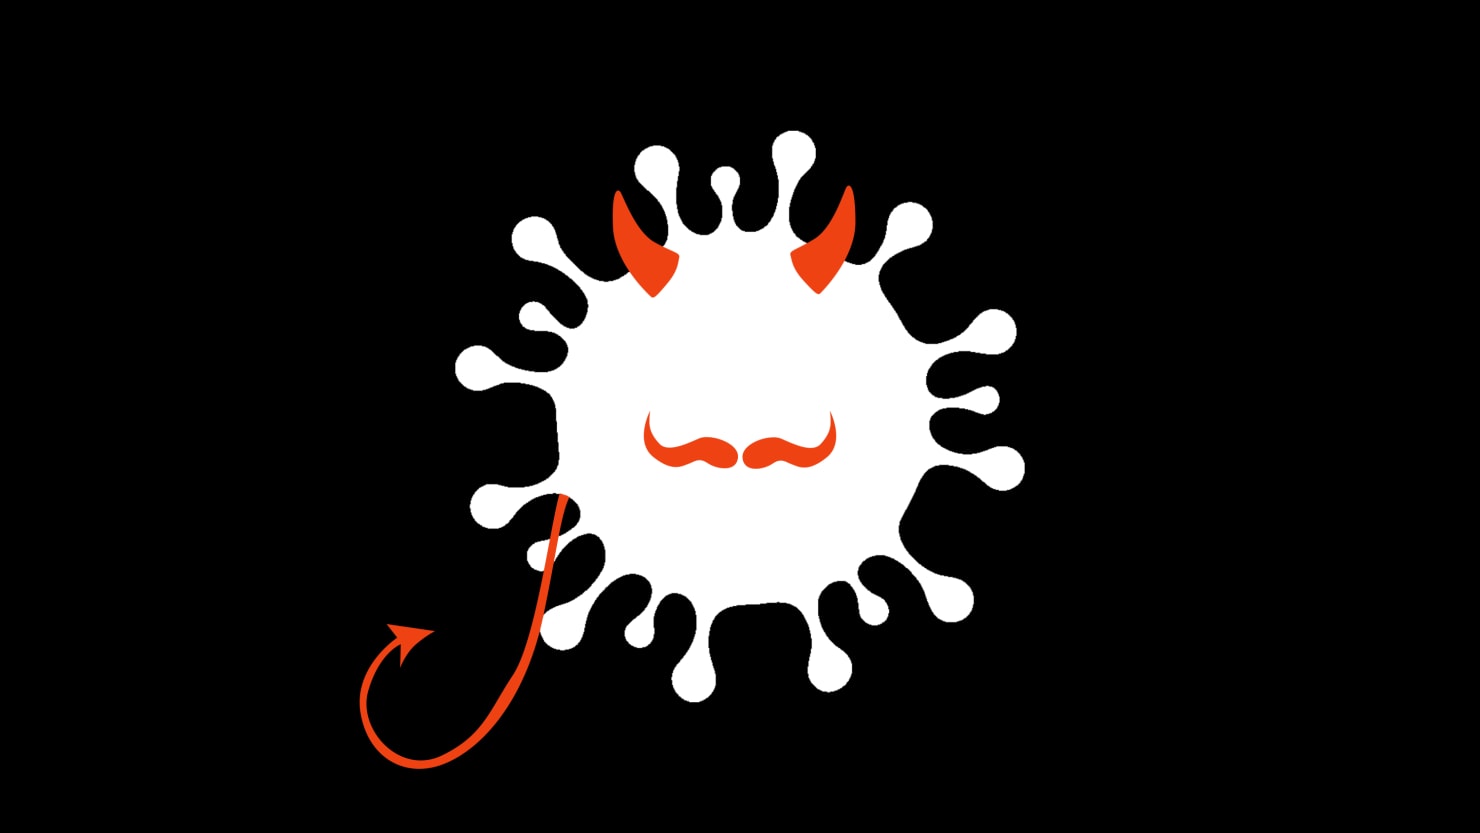 Yes, Scientists Made a Deadlier COVID Virus. No, Its Not Bad.